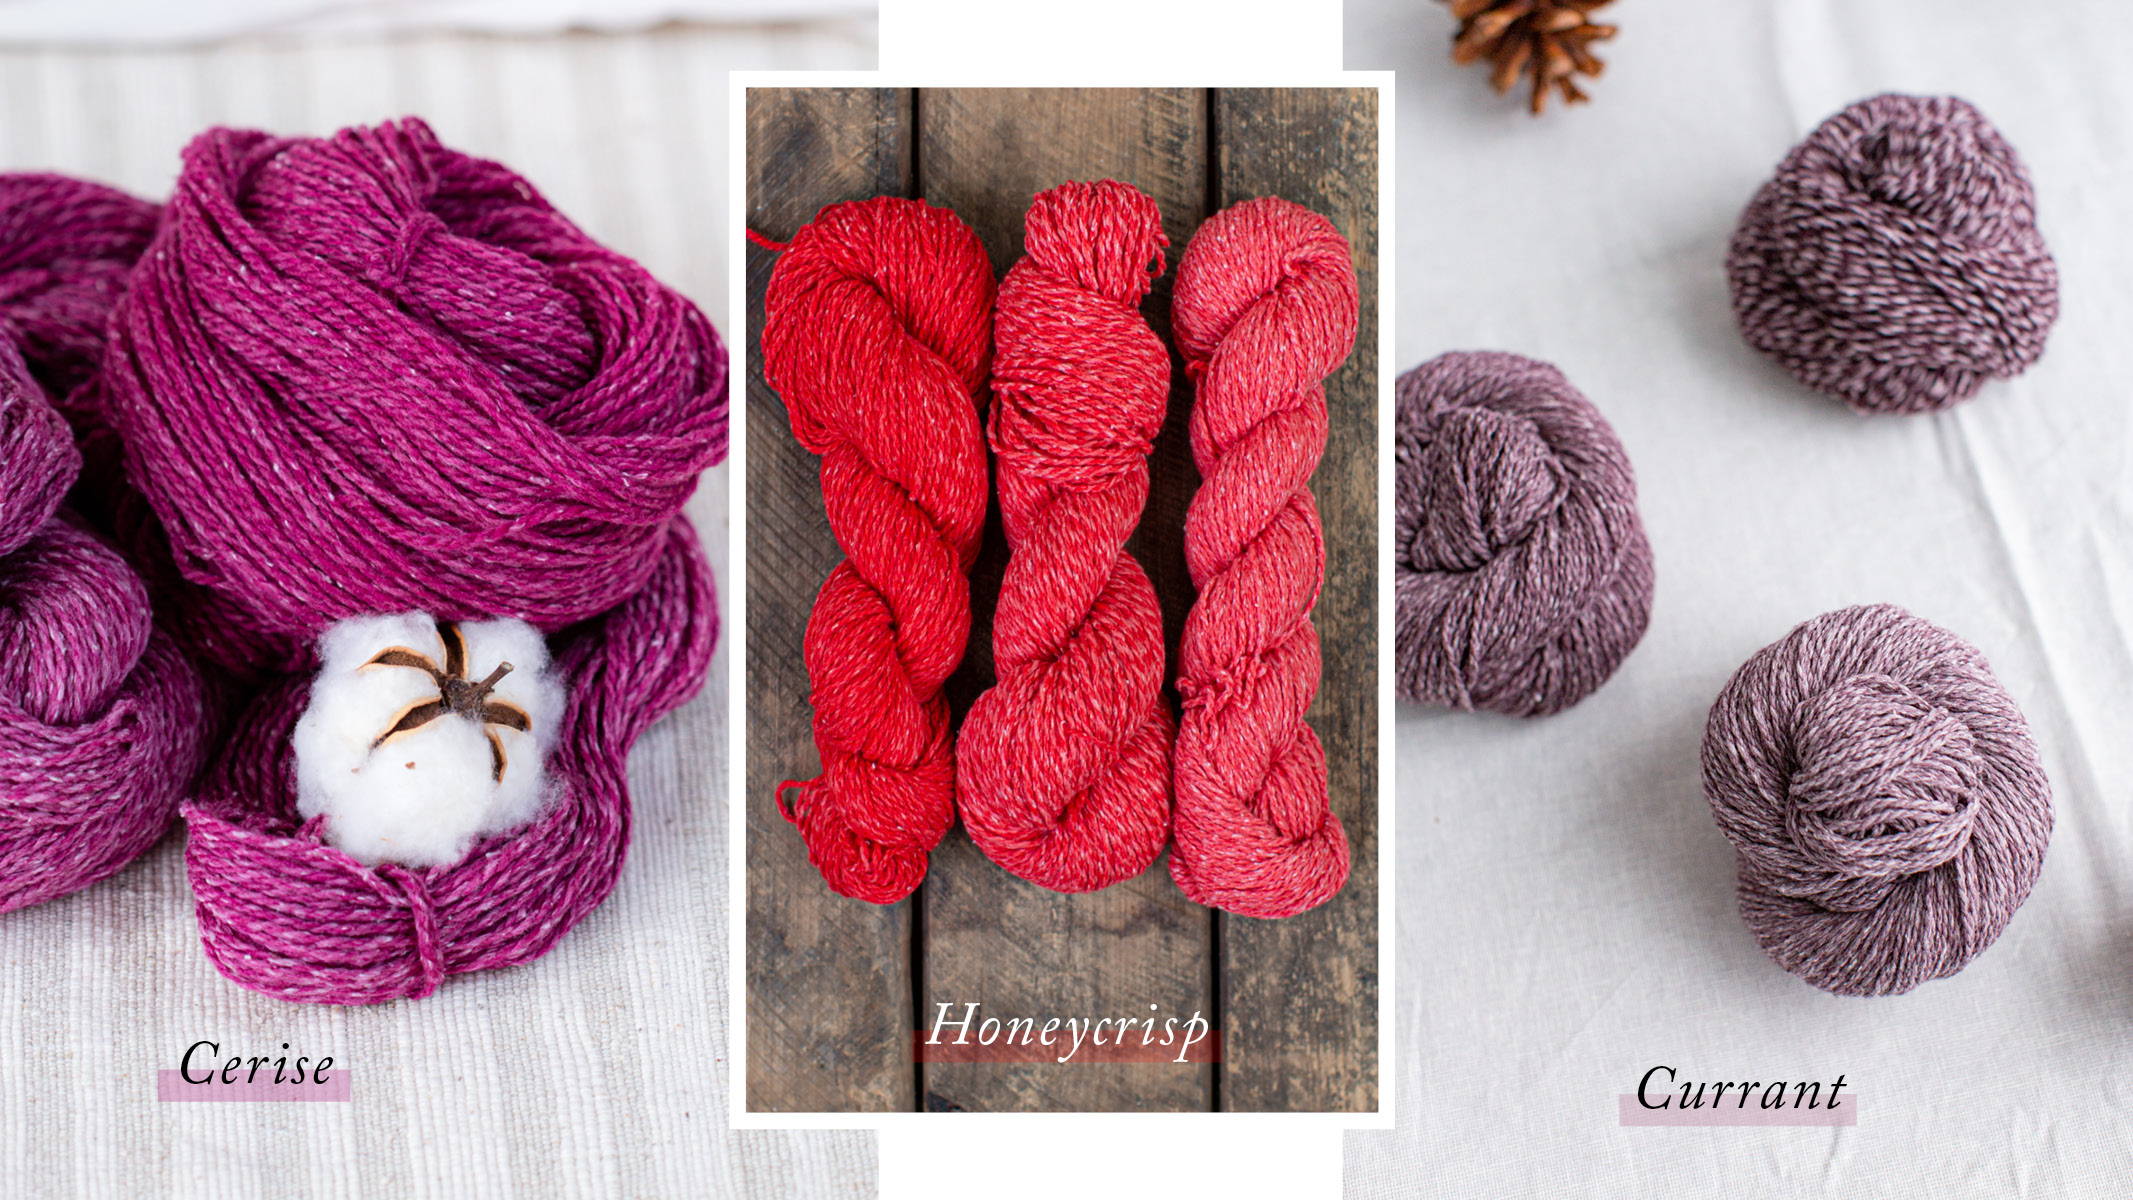 Left: multiple skeins of Dapple Cerise swirled together hugging a cotton flower. Middle: three skeins of Dapple Honeycrisp in a row in varying tones on a wooden box. Right: three swirled skeins of Dapple Currant in varying tones sit on white linen in a triangle formation. 